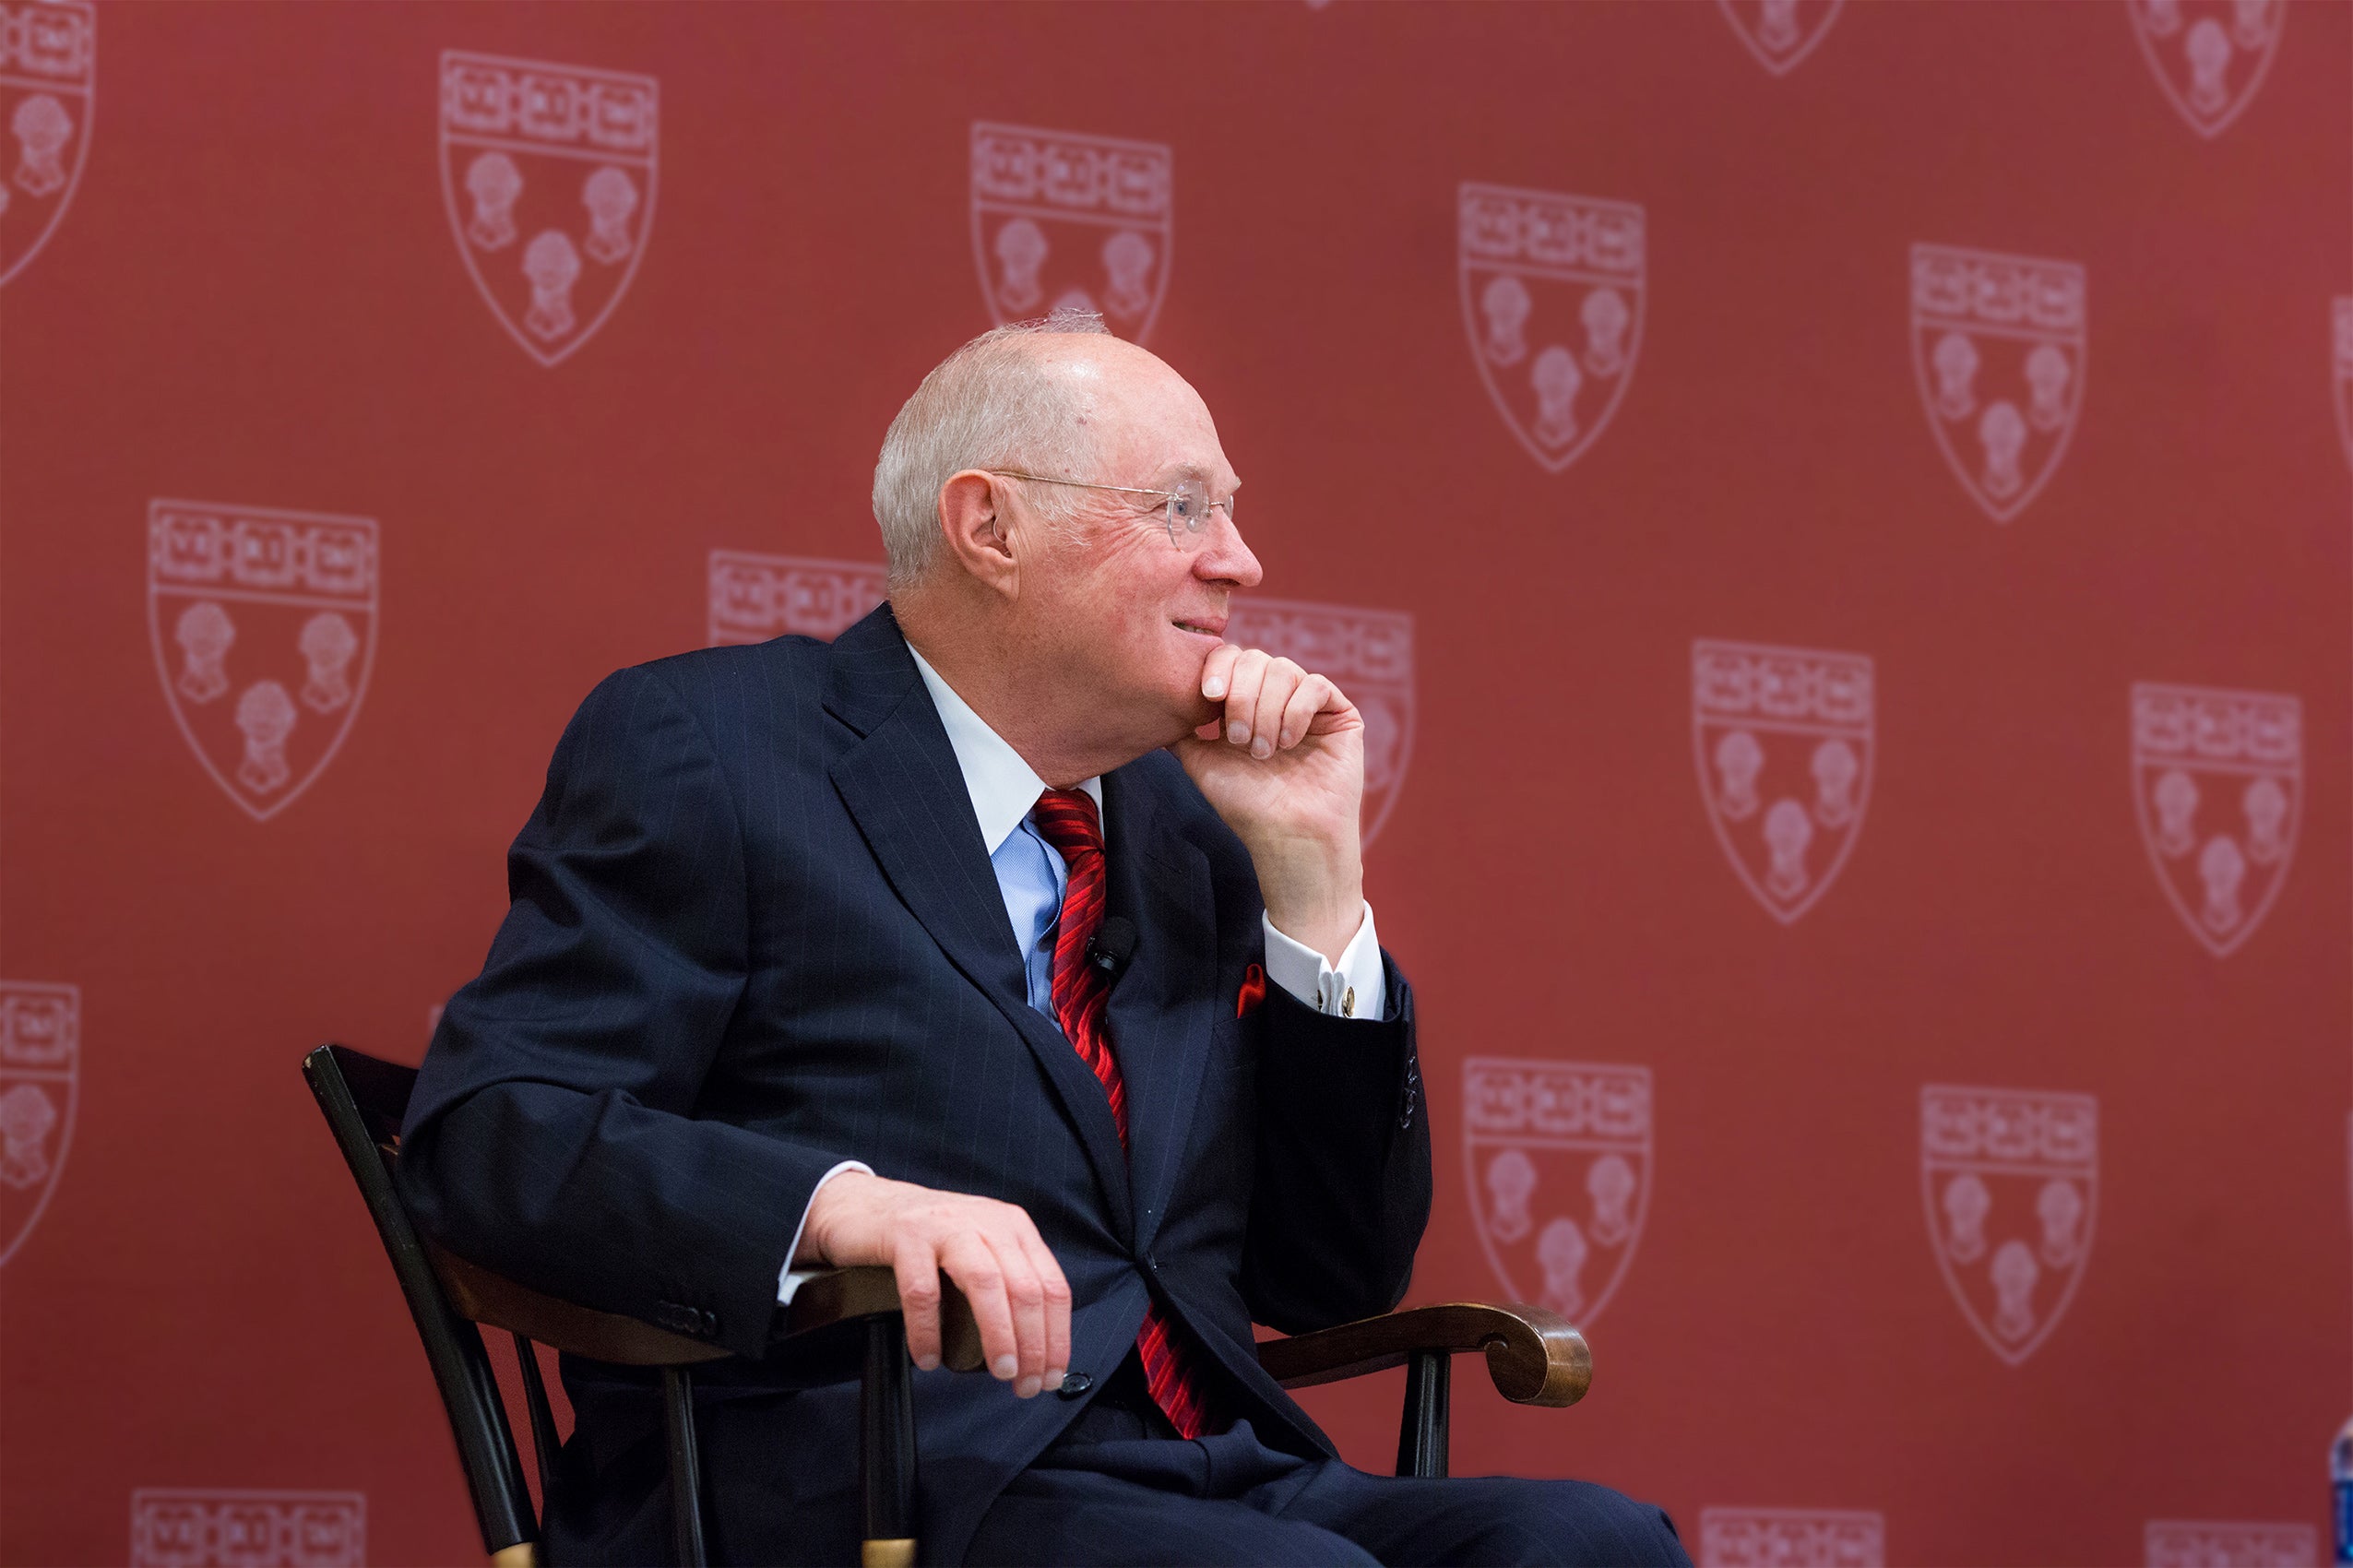 Justice Anthony Kennedy ’61 to retire from Supreme Court 5